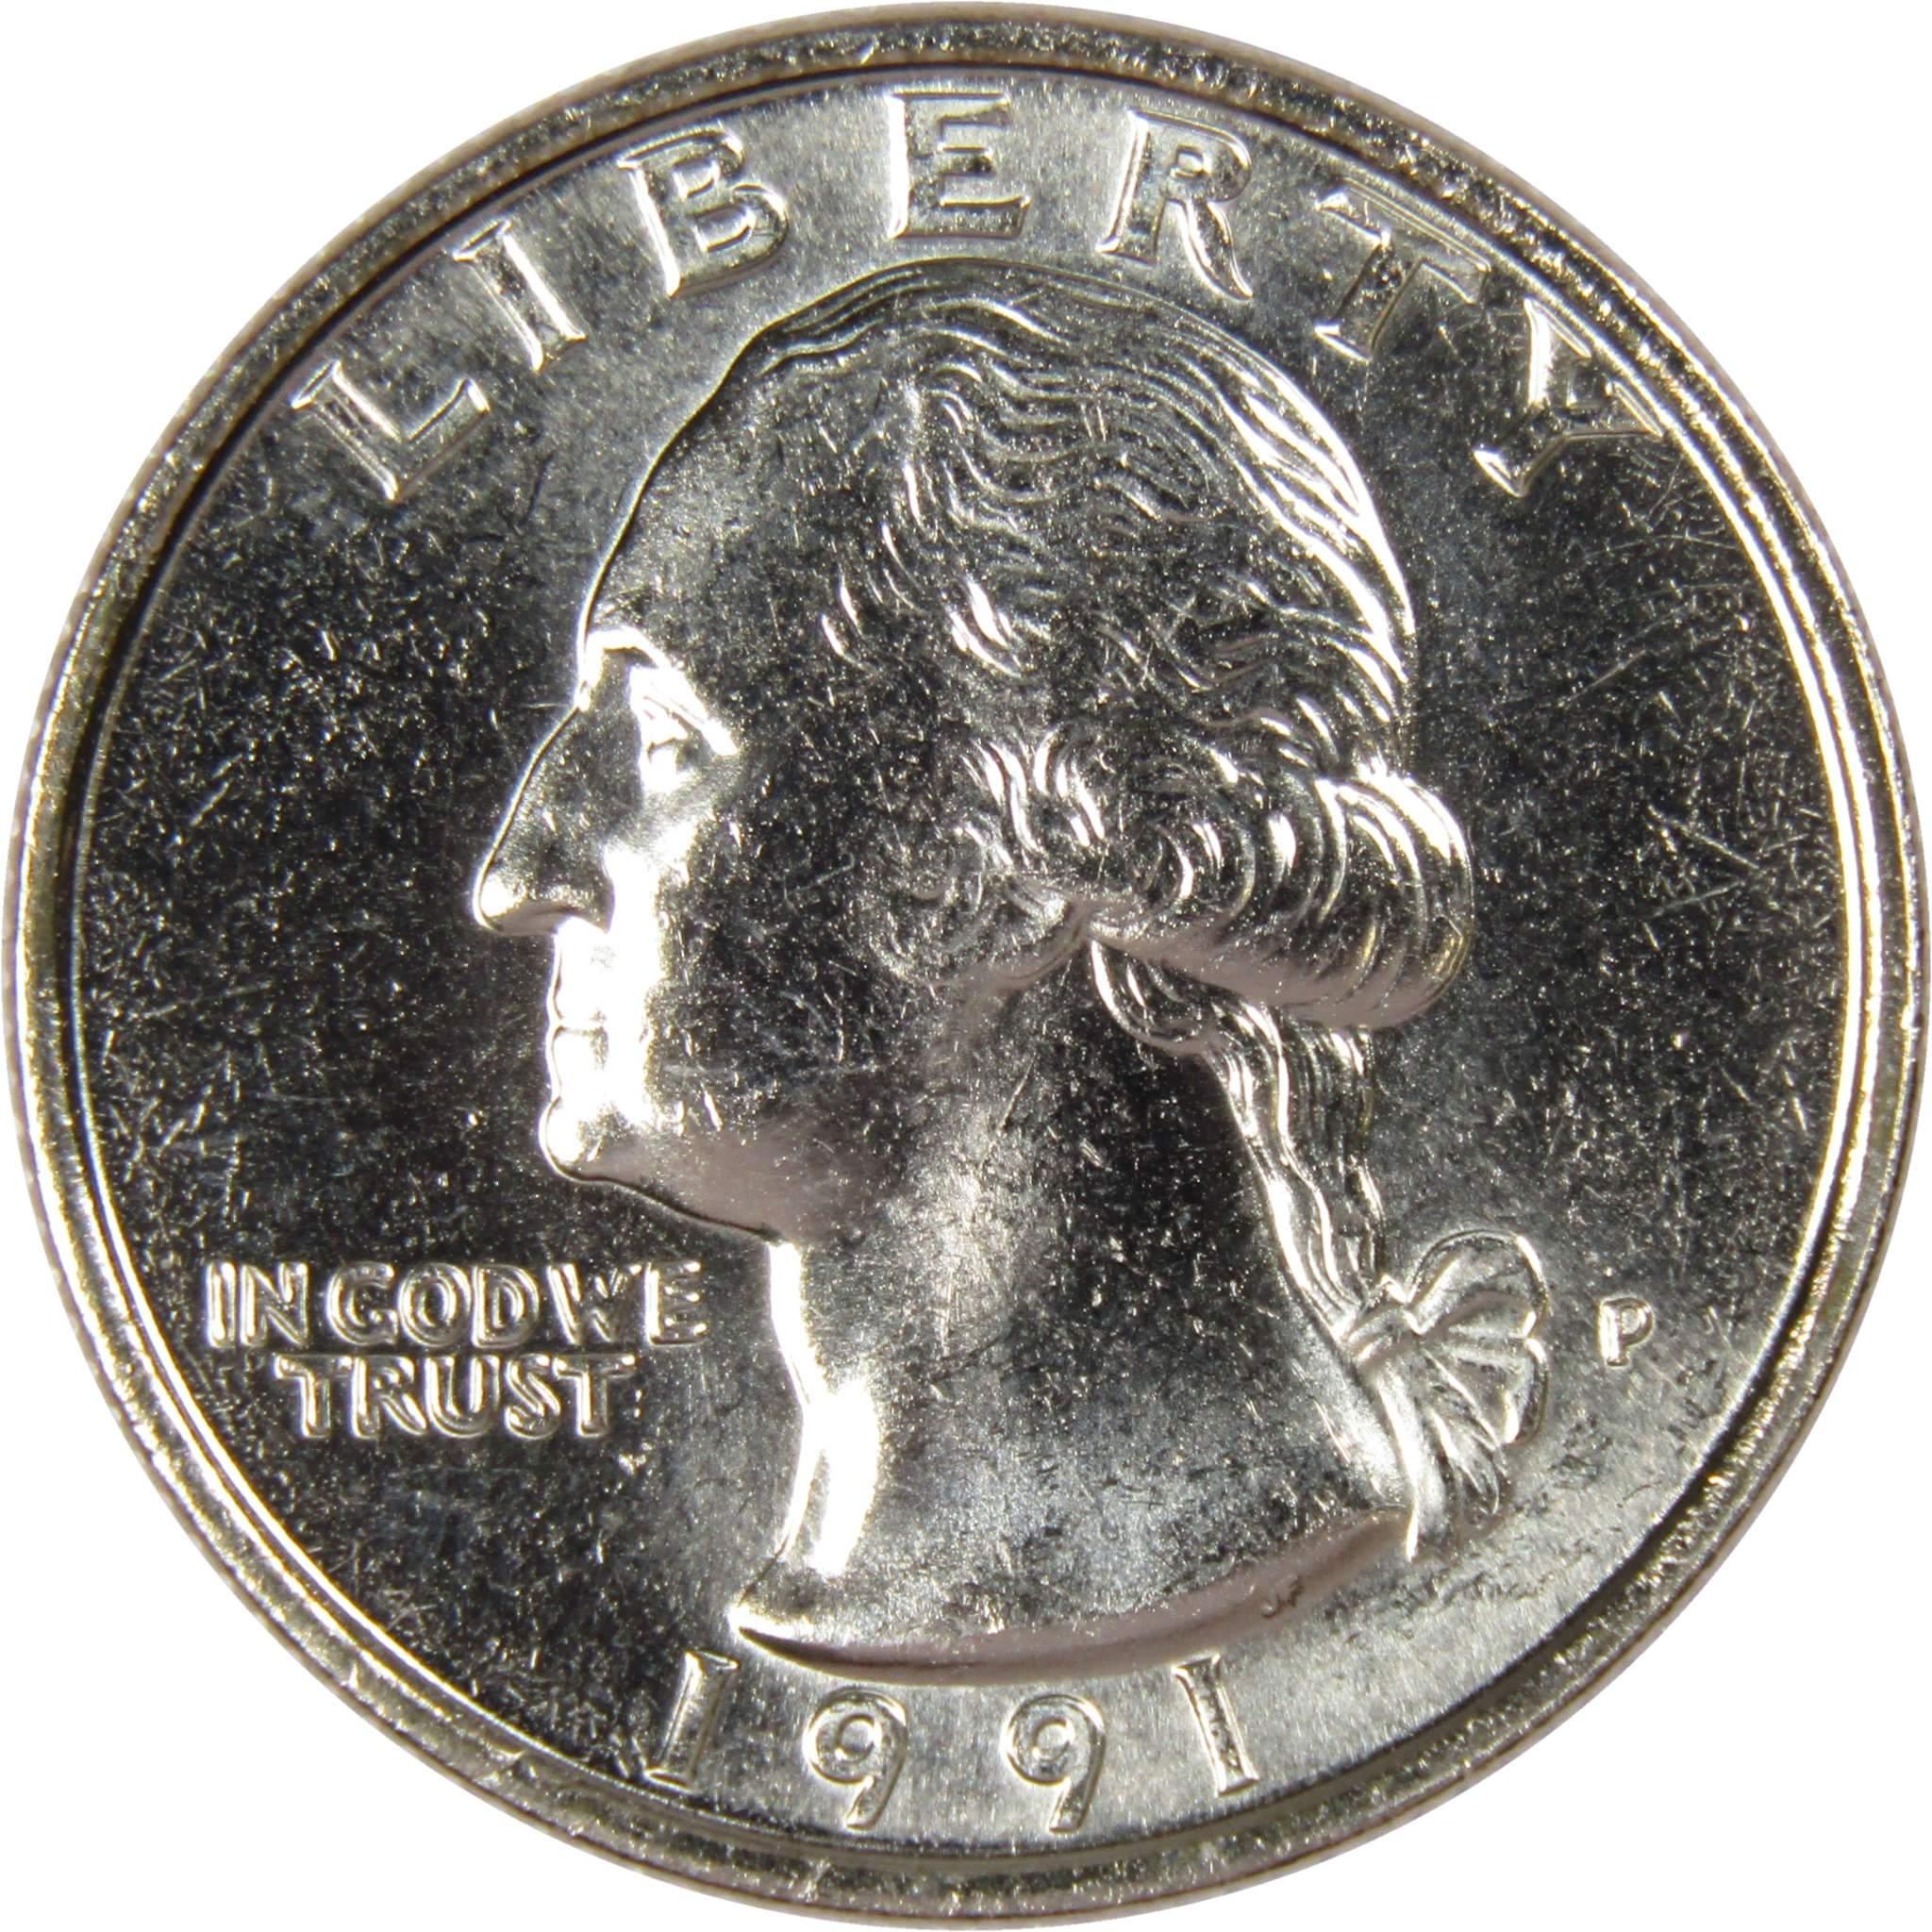 1991 P Washington Quarter BU Uncirculated Mint State 25c US Coin Collectible